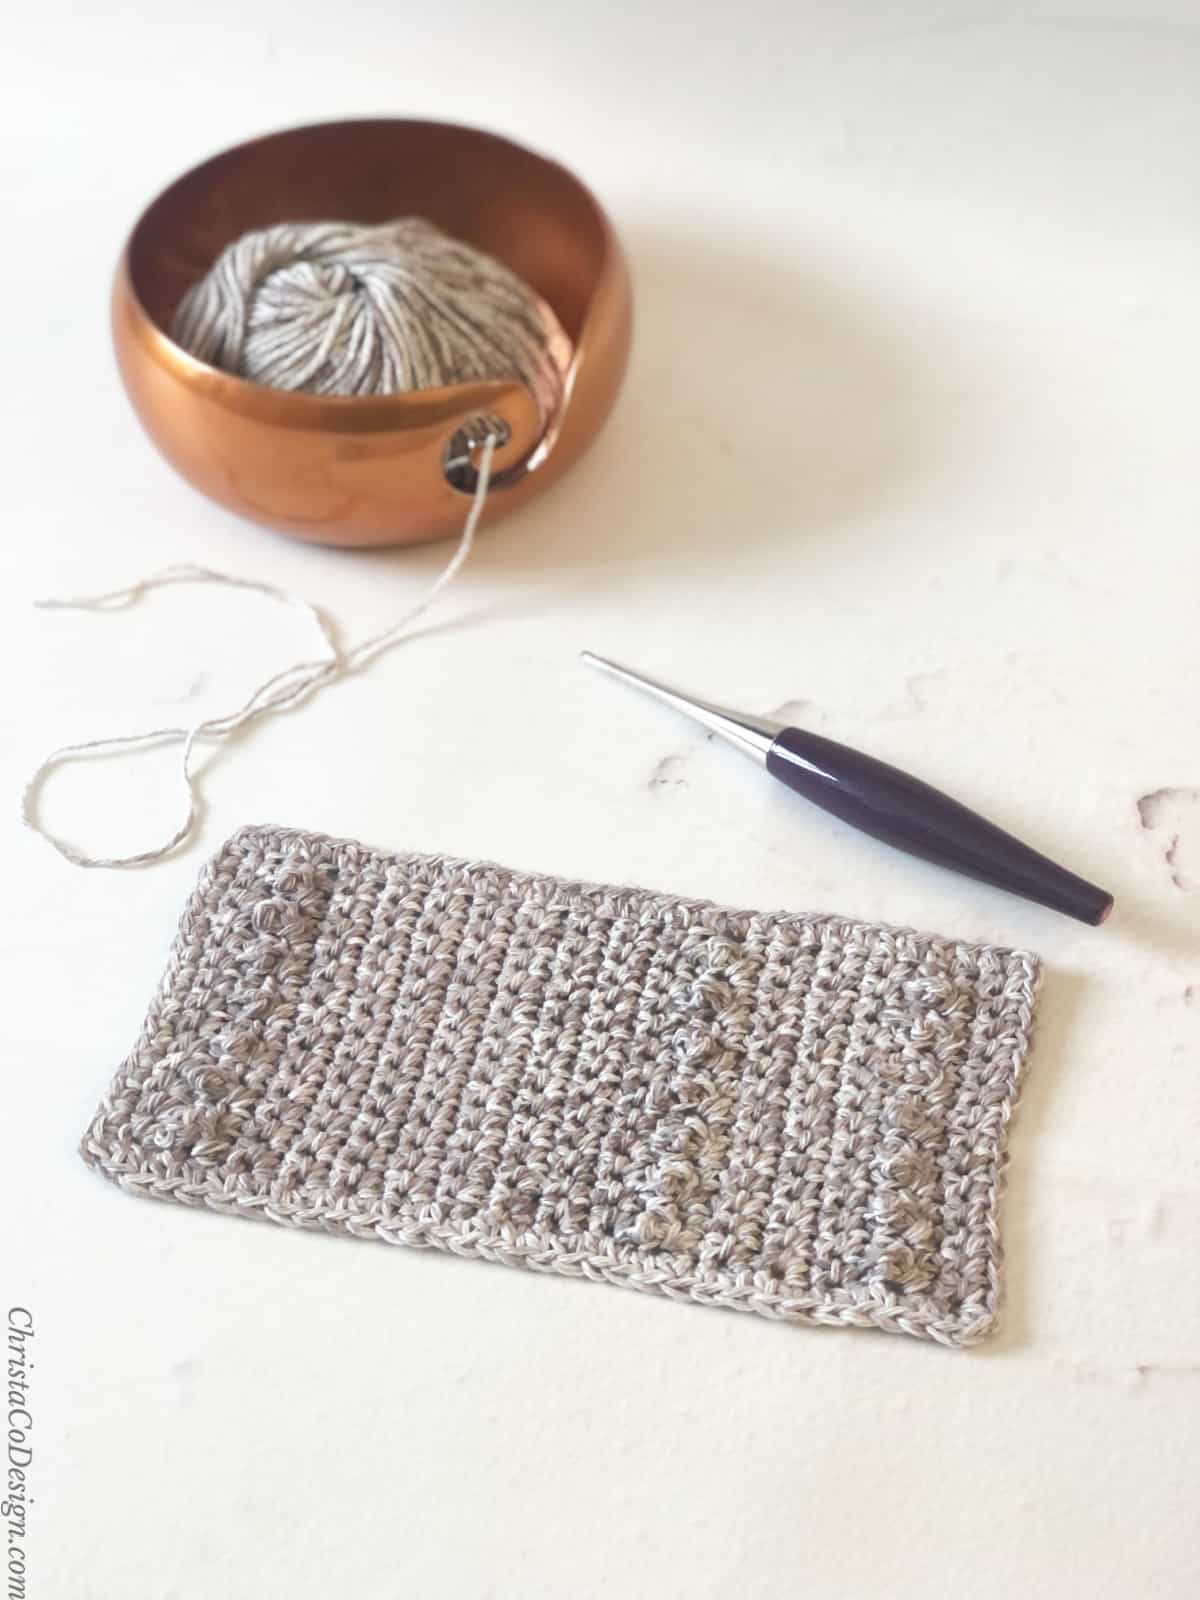 Grey mug rug crochet pattern with hook and yarn in copper bowl on table.